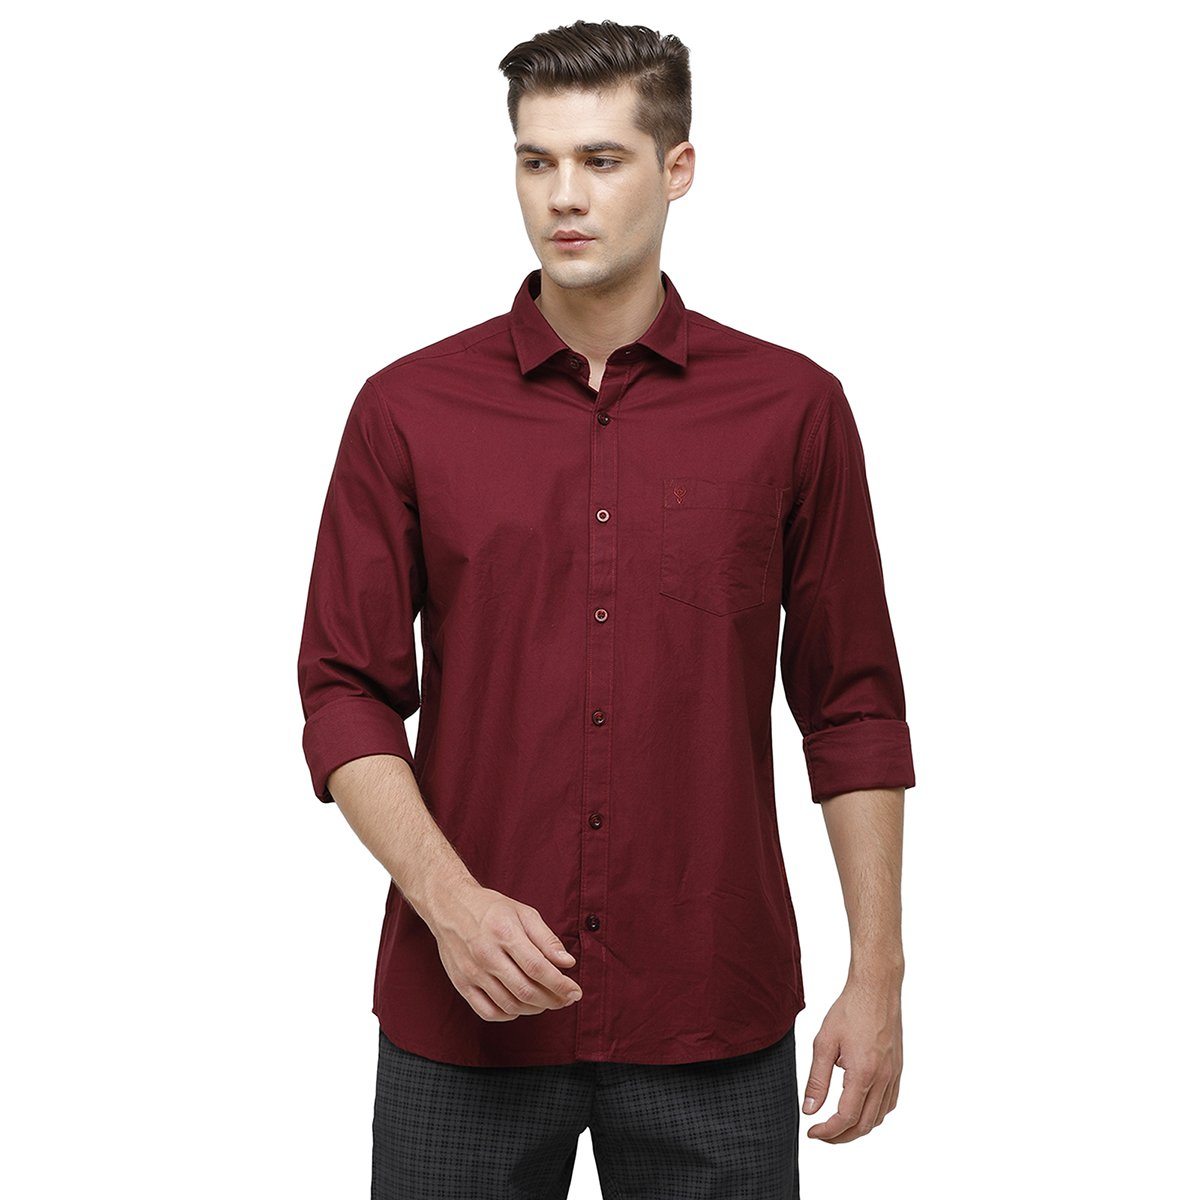 Classic Polo Mens Collar Neck Full Sleeve Wine Smart Fit 100% Cotton Woven Shirt SM1-68 A-FS-SLD-SF Shirts Classic Polo 